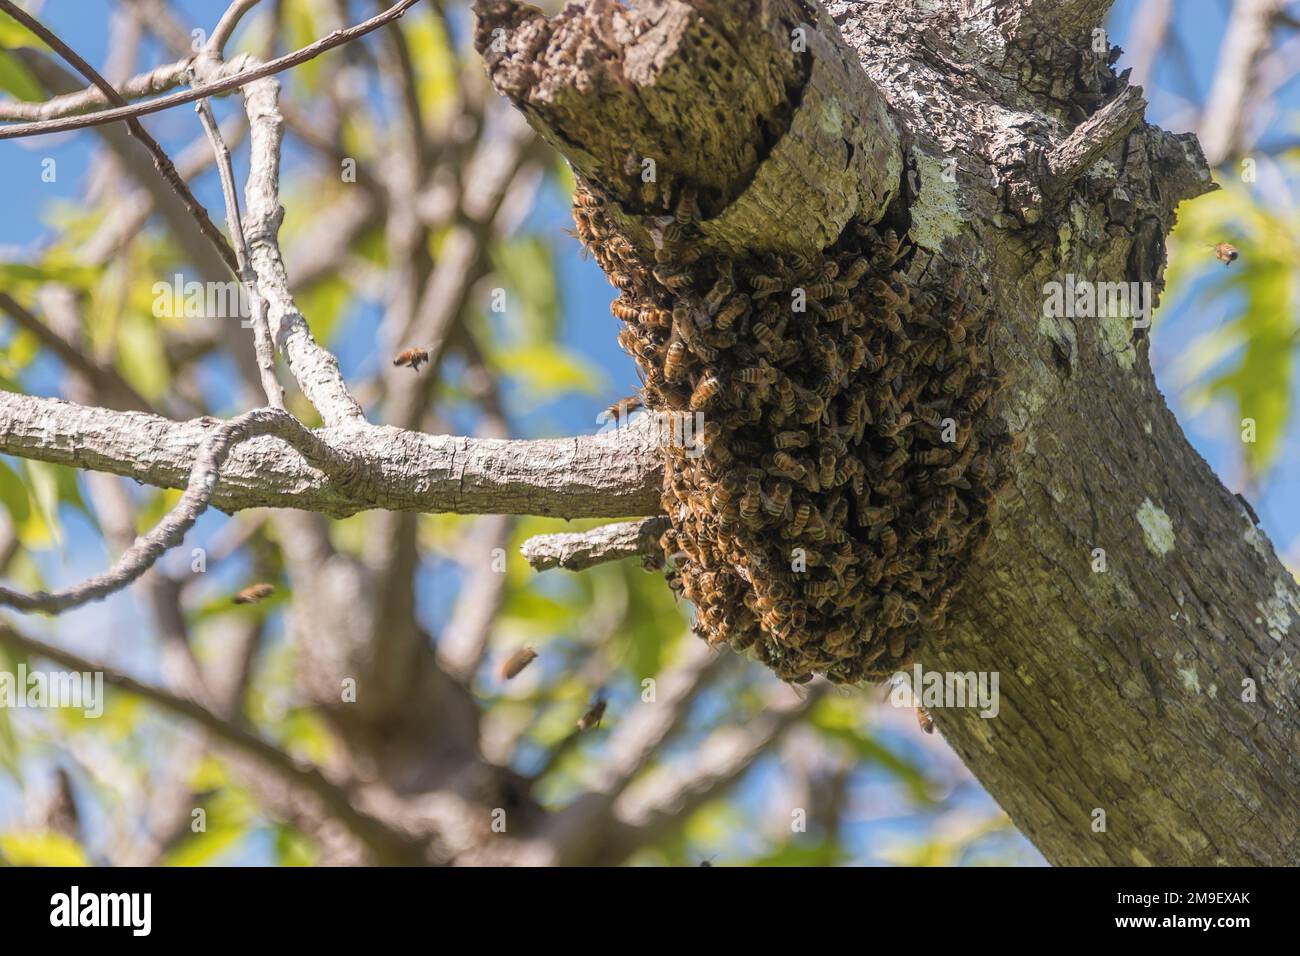 Non-native, swarming honey bees, Apis mellifera, resting on avocado tree (persea americana) in an orchard in Queensland, Australia. Stock Photo